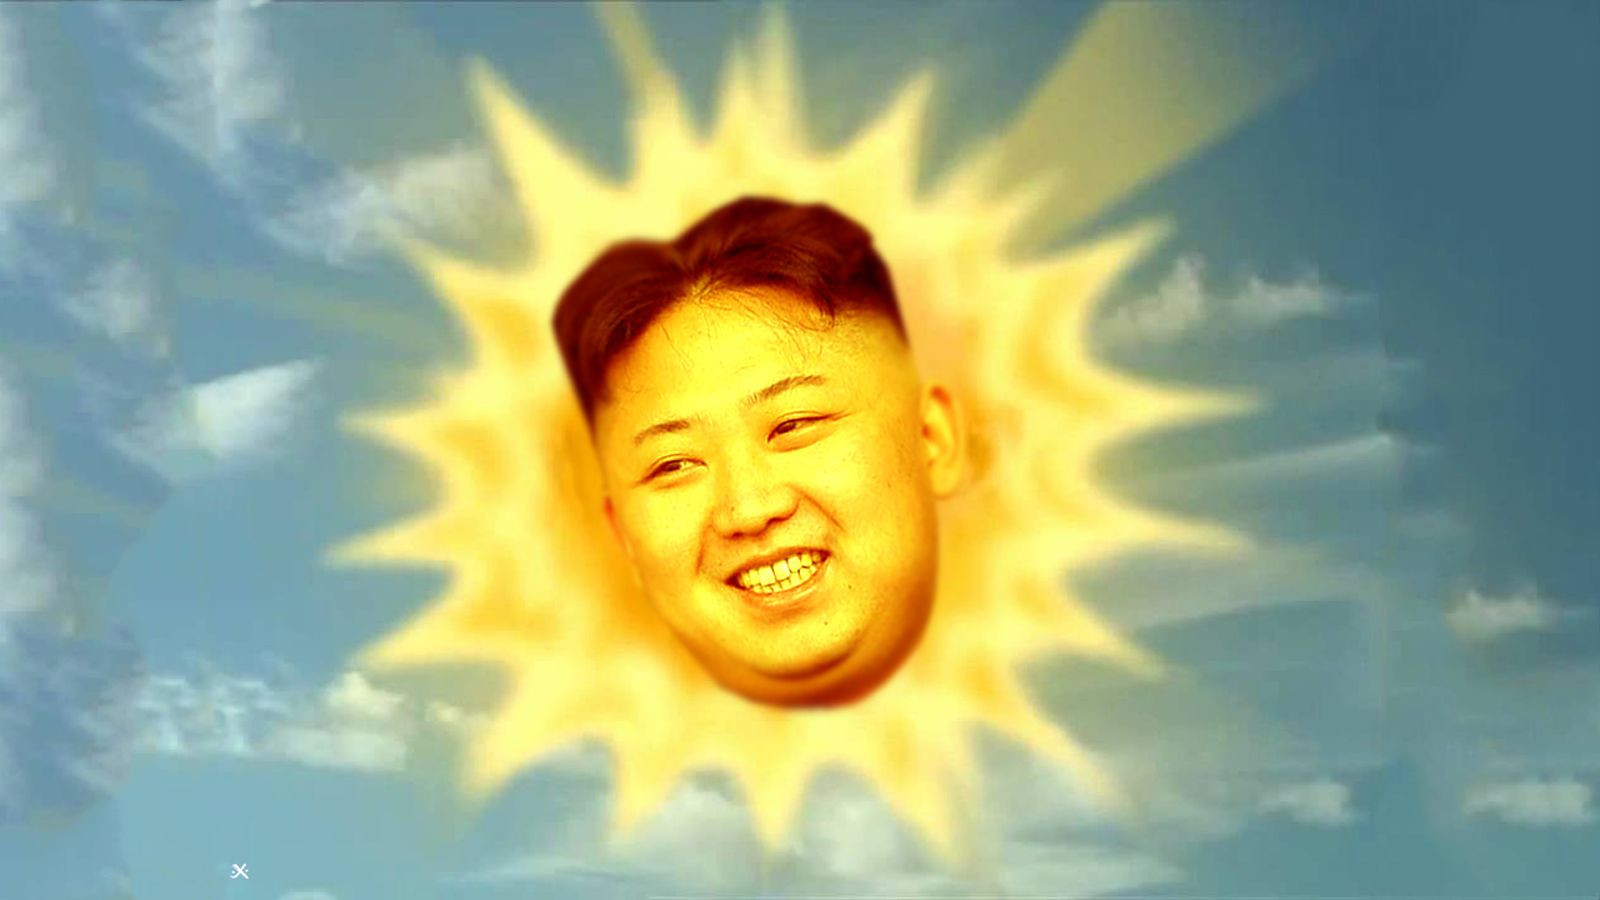 Beautiful Wallpaper of our Glorious Leader - Imgur